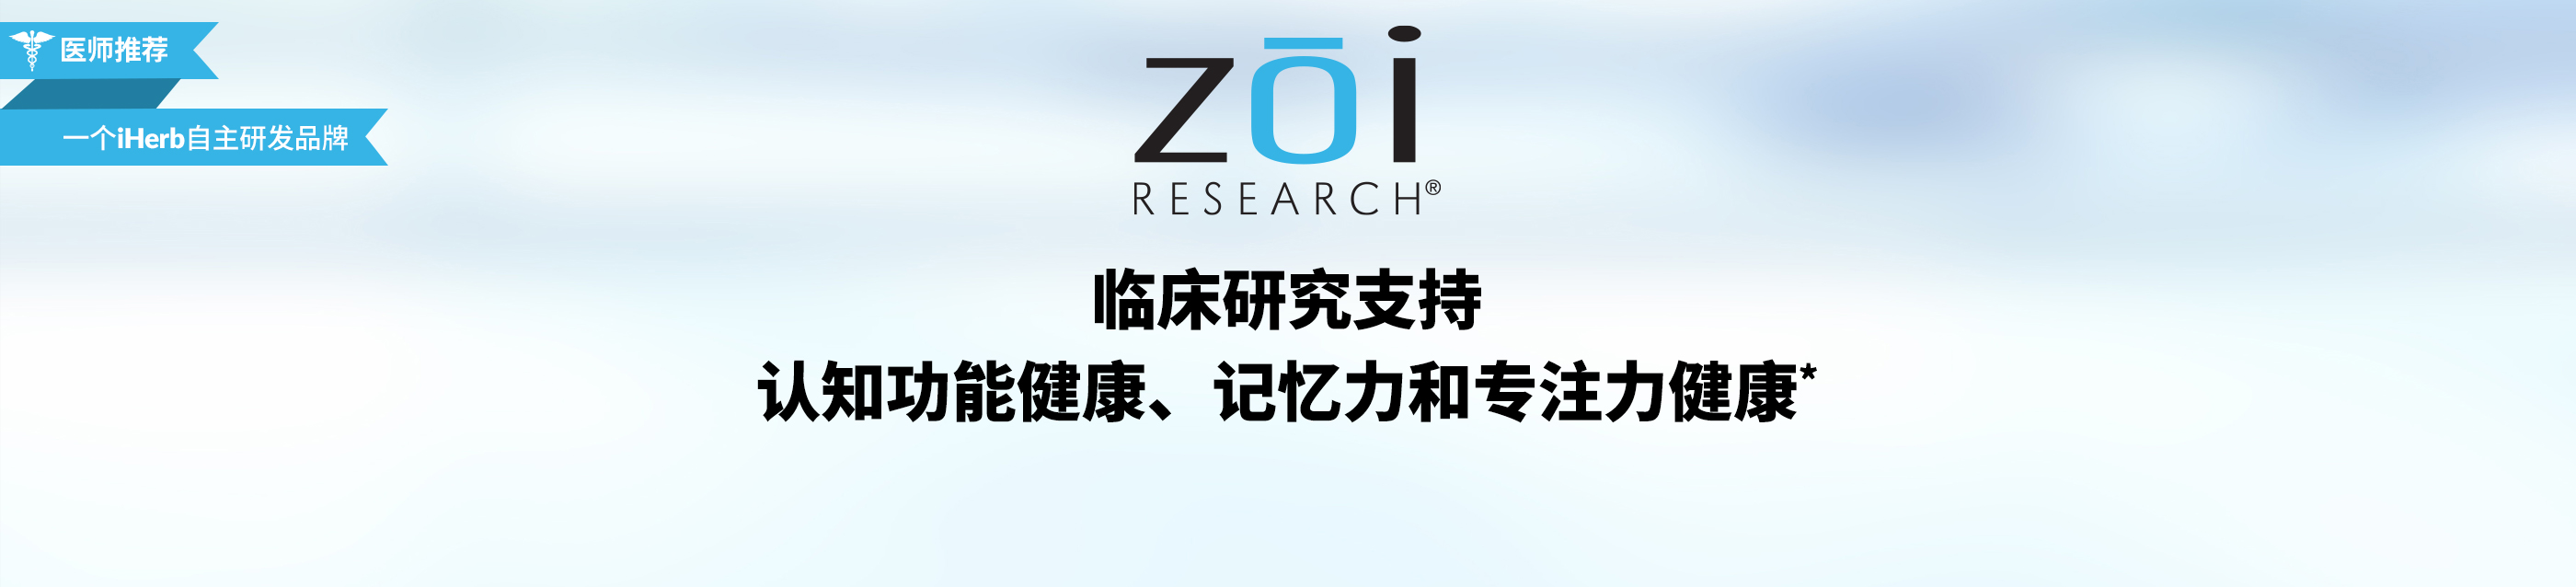 Zoi Research Cognitive Health